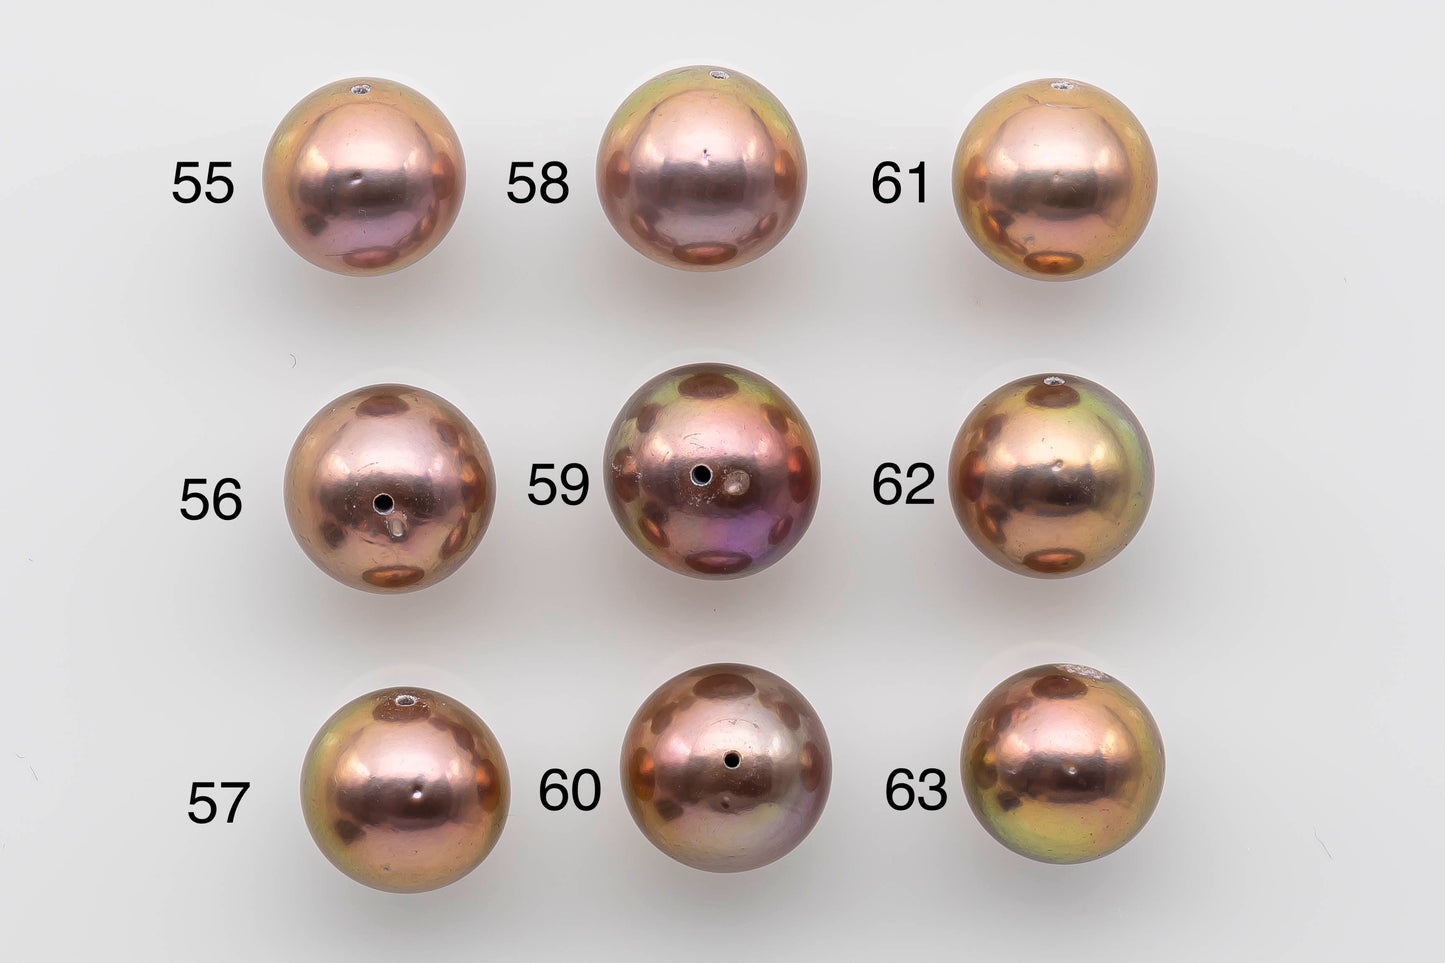 12-13mm Single Edison Pearls Full Drilled in Natural Color and High Luster with Minimum Blemishes or Flaws for Jewelry Making, SKU # 1304EP